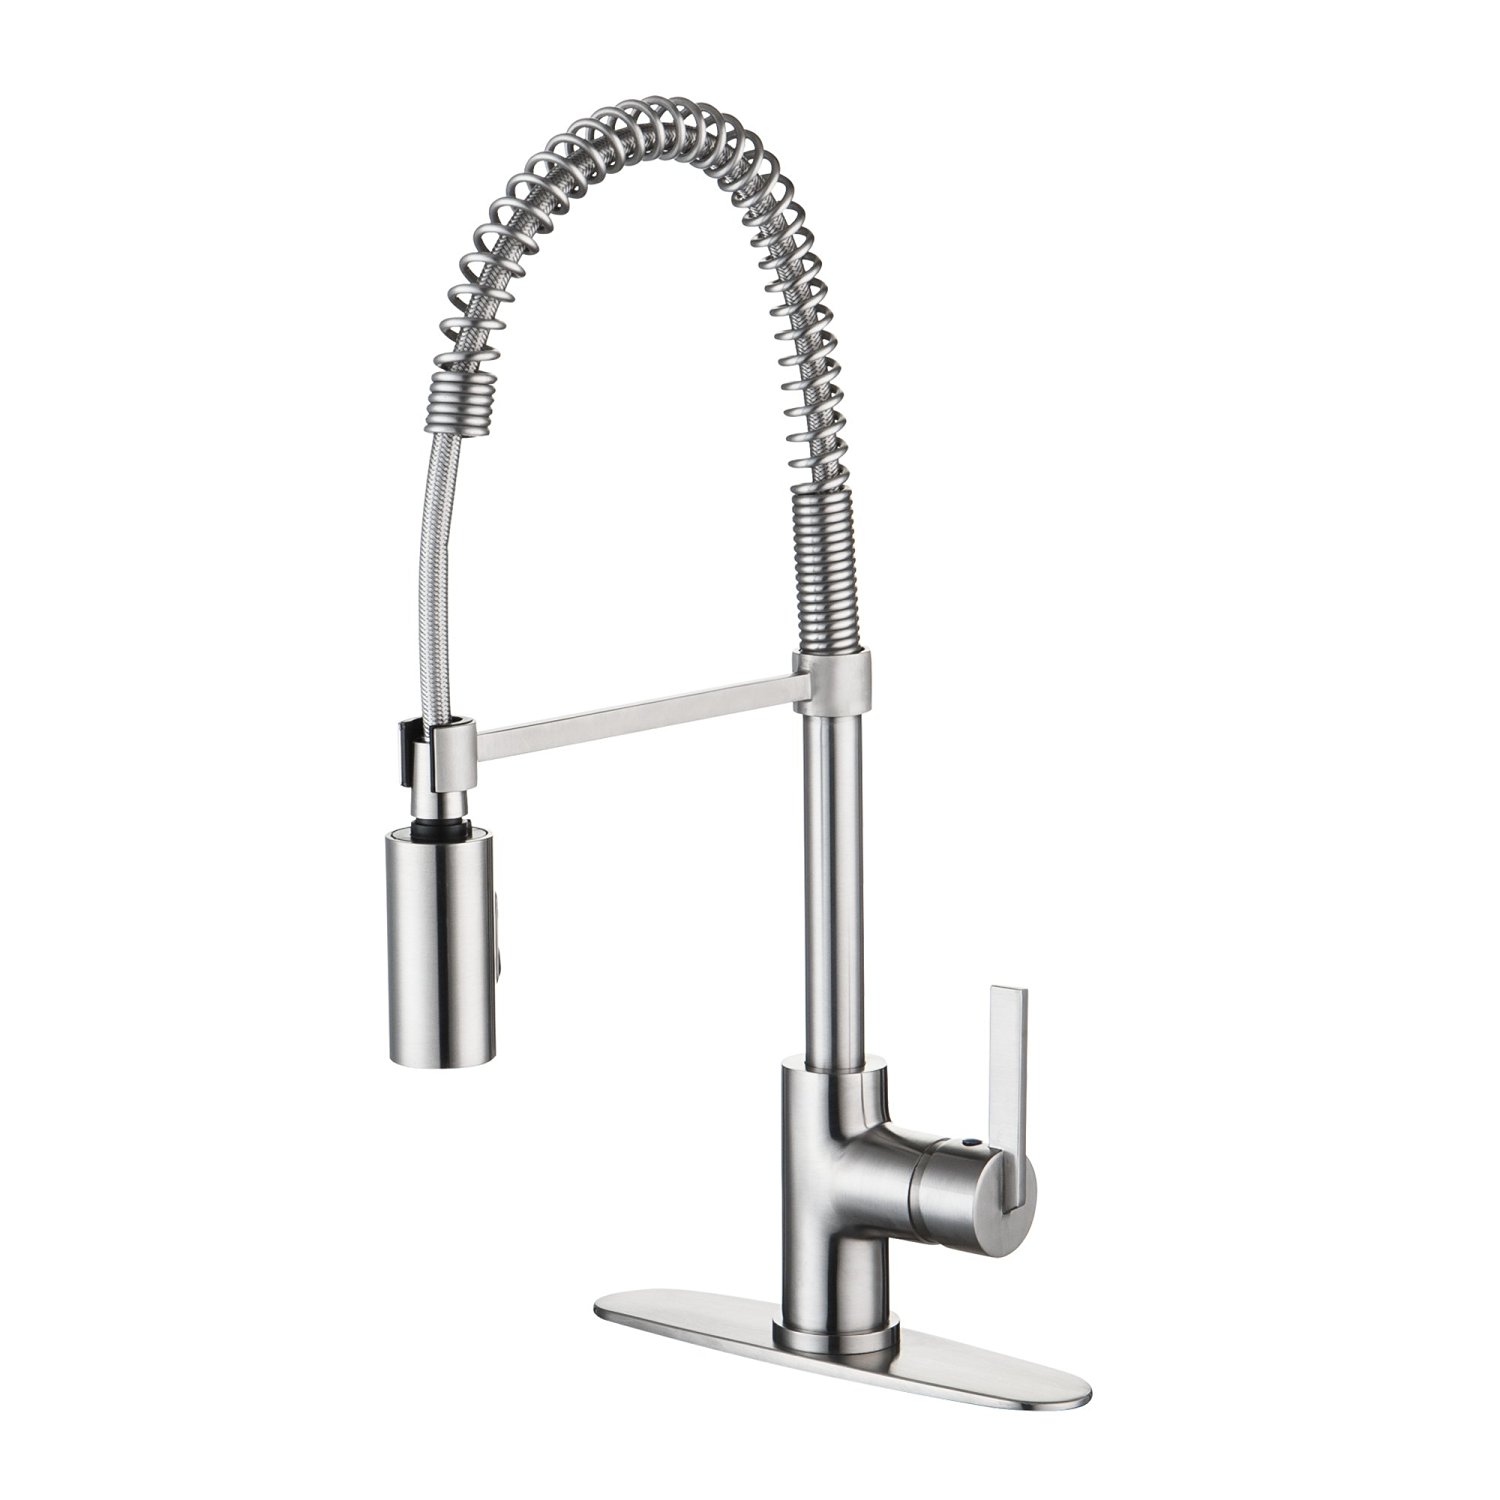 Lazio Single Handle Kitchen Faucet with Pull Down Sprayer